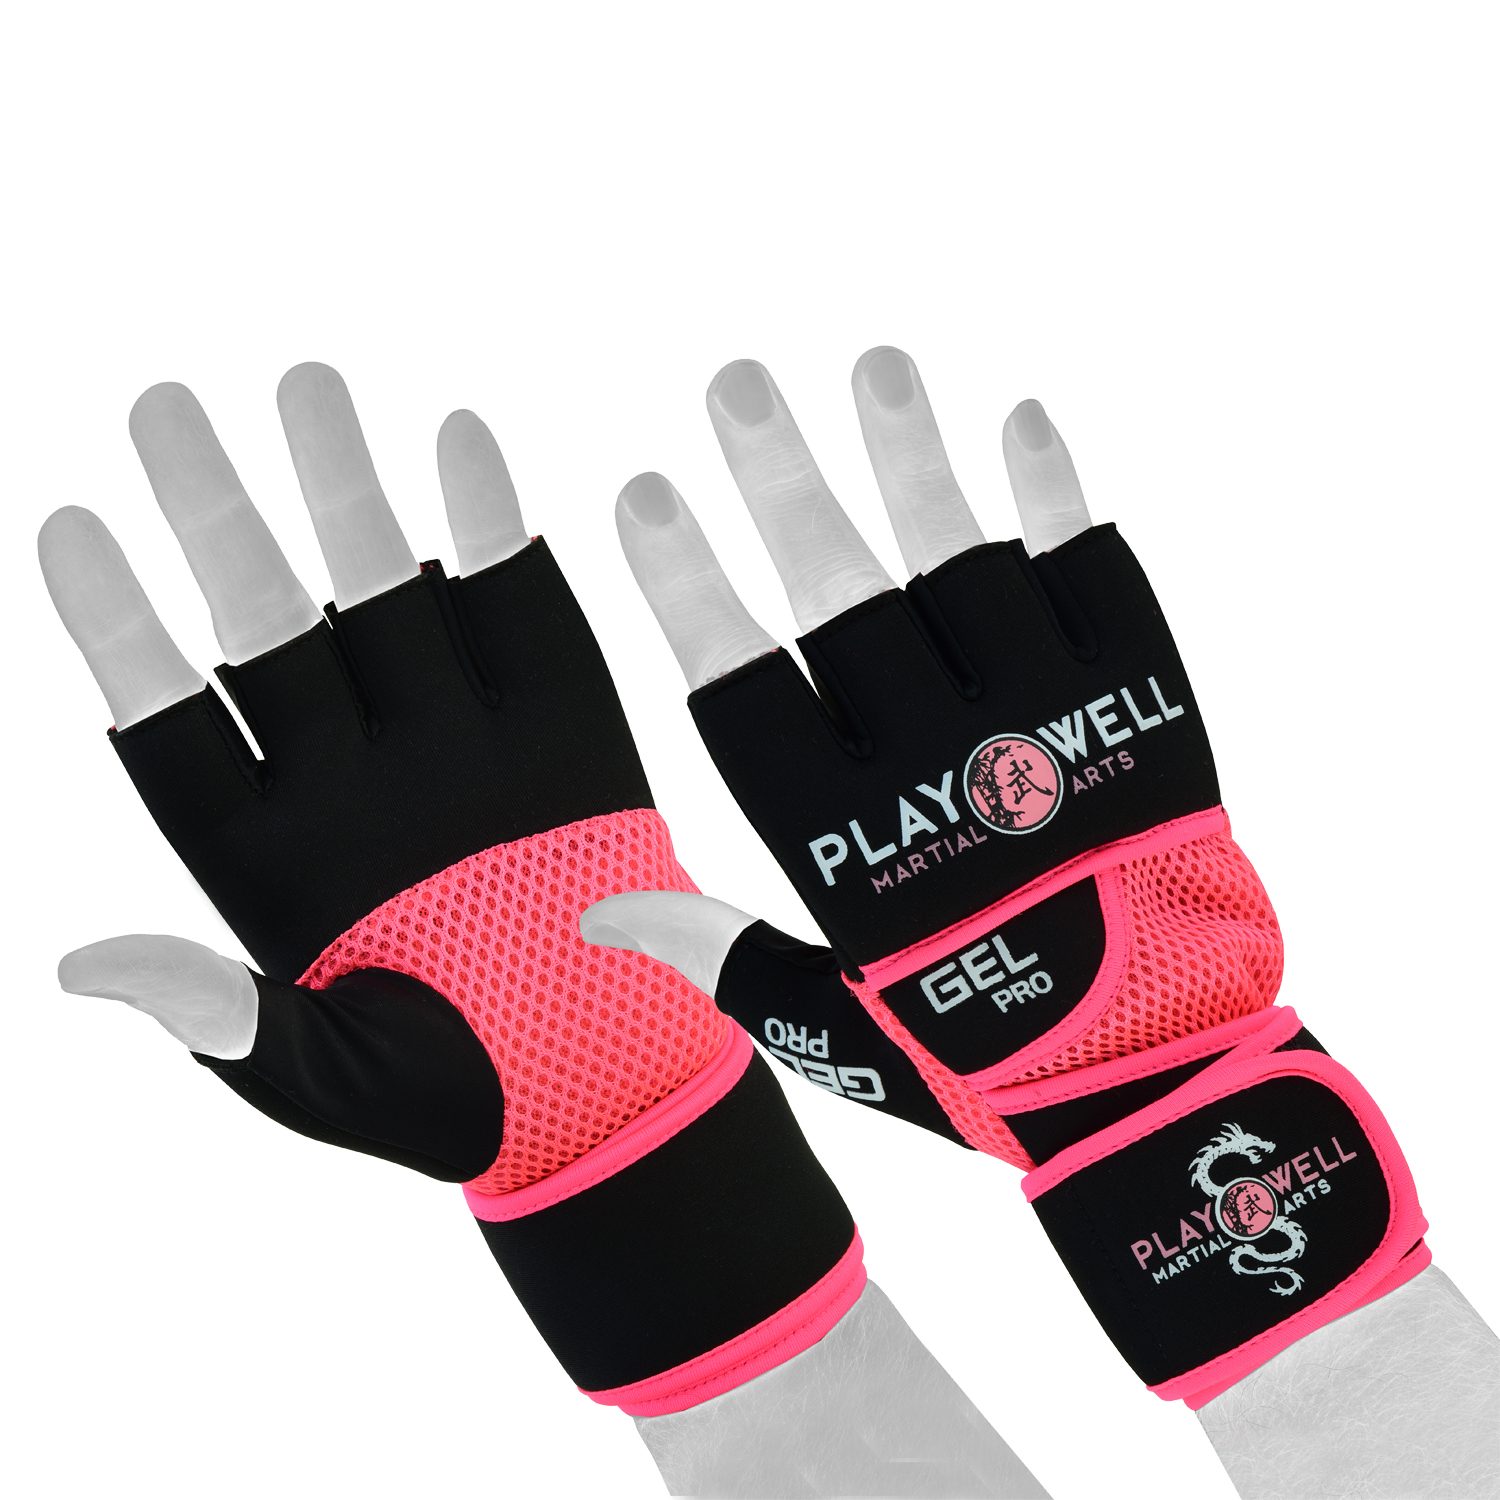 Playwell Elite Ladies Pro Gel Hand Wrap Gloves - Black/Pink - Click Image to Close